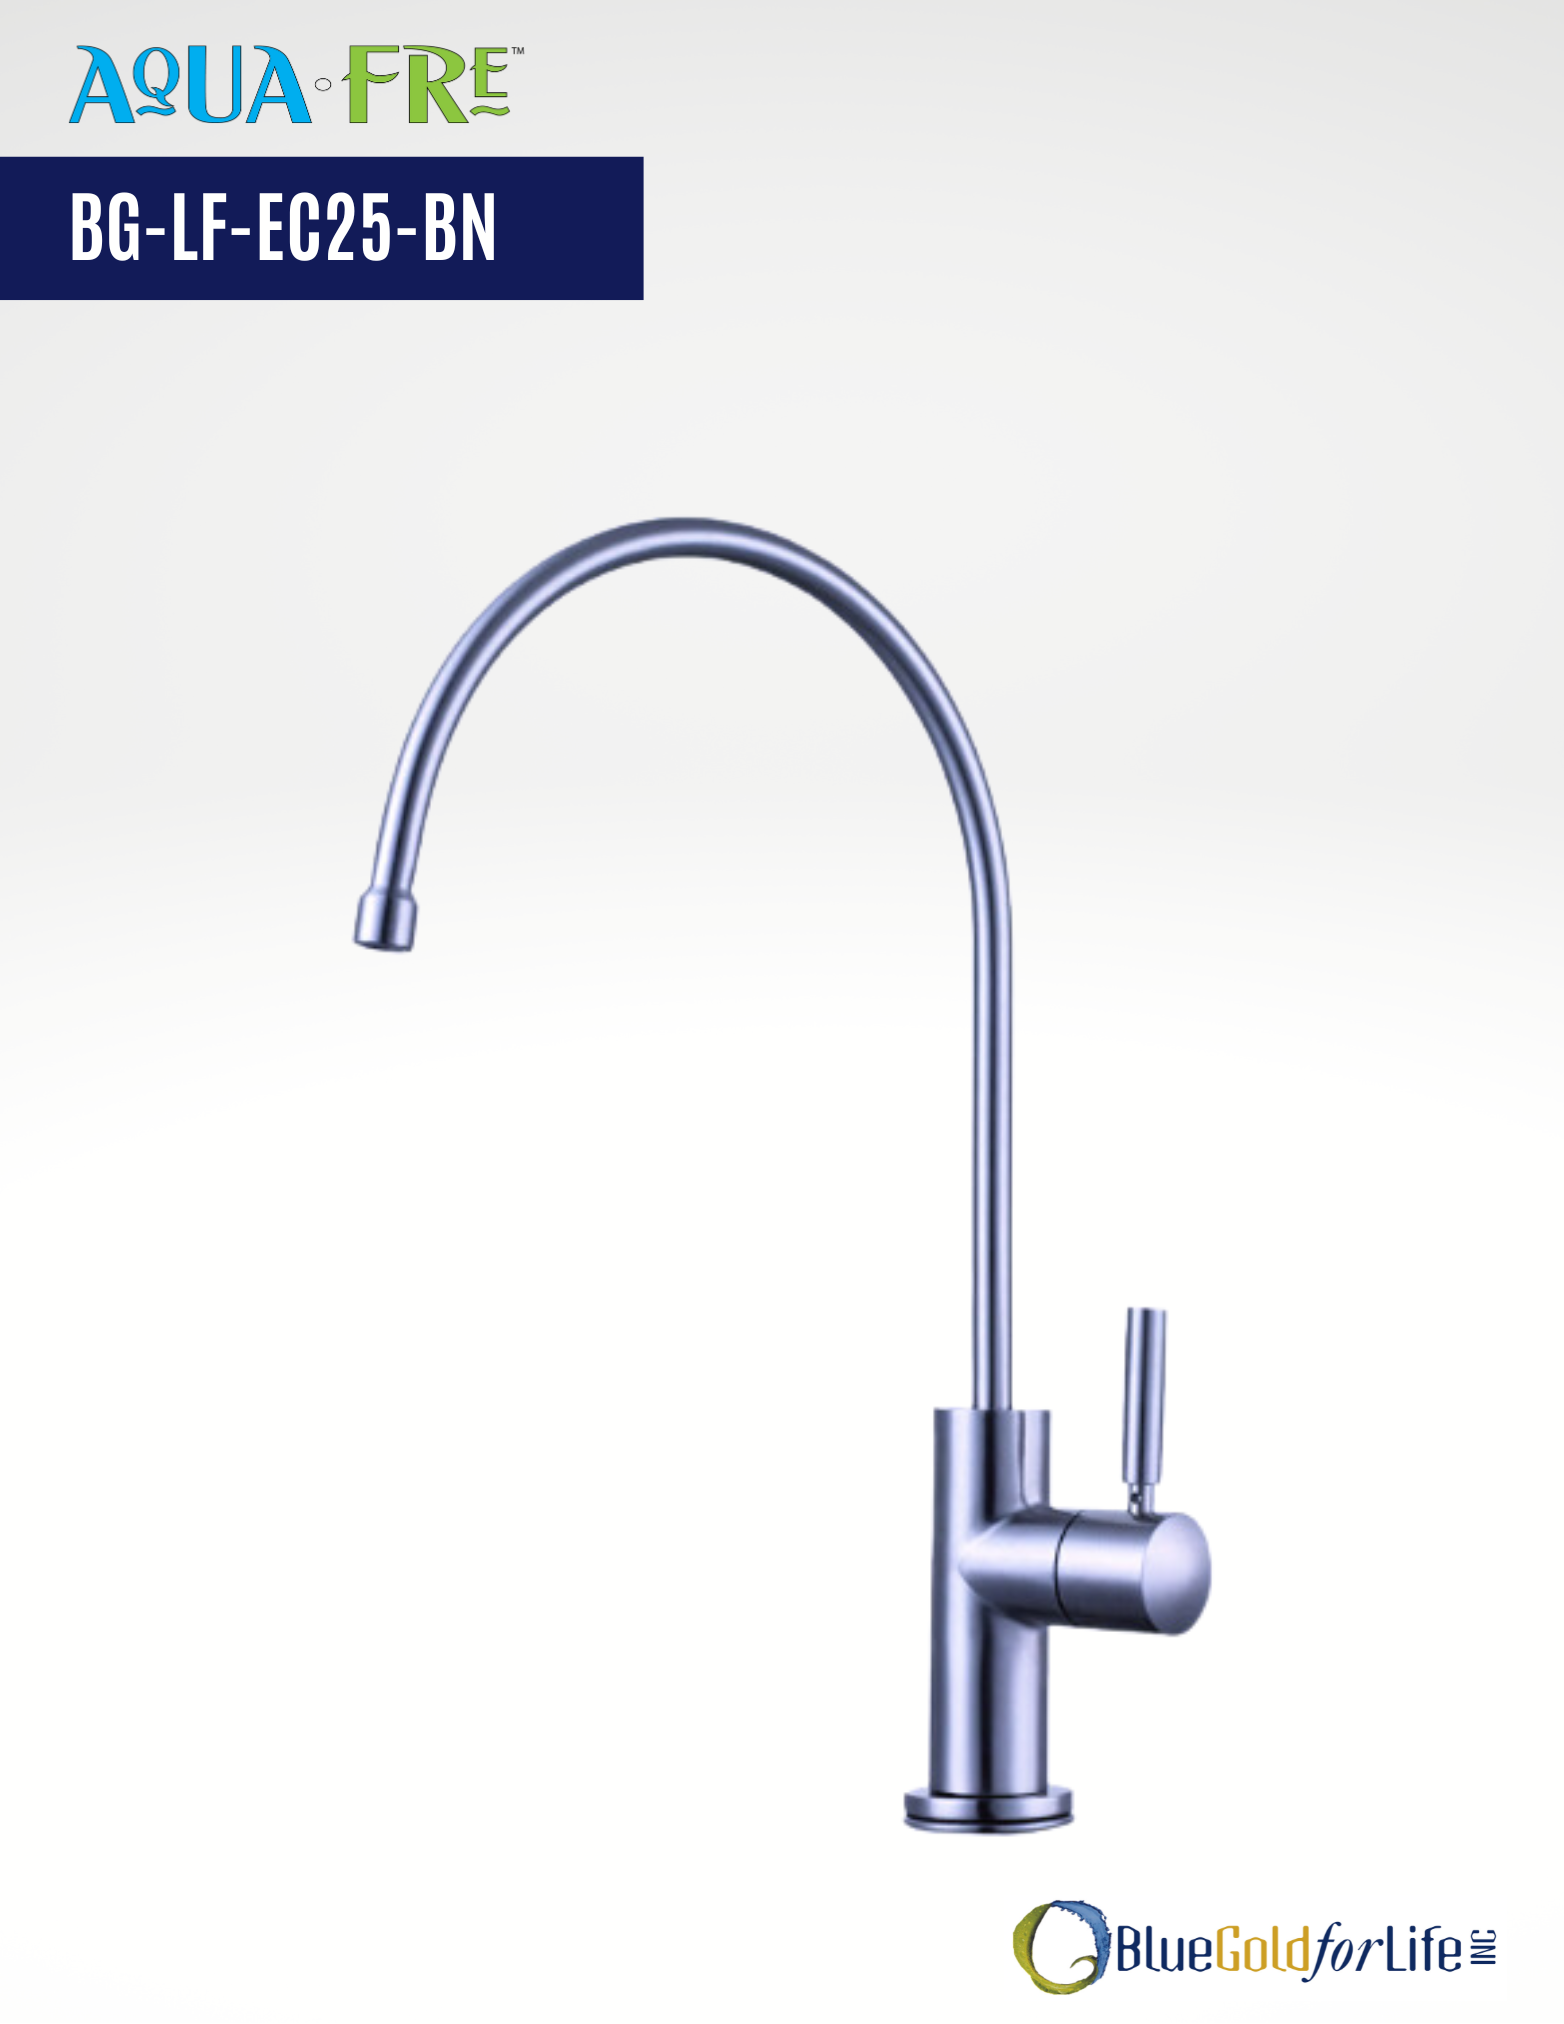 AquaFre Touch-Flo Goose Neck Stainless Steel Cold Deck-mount Water Faucet